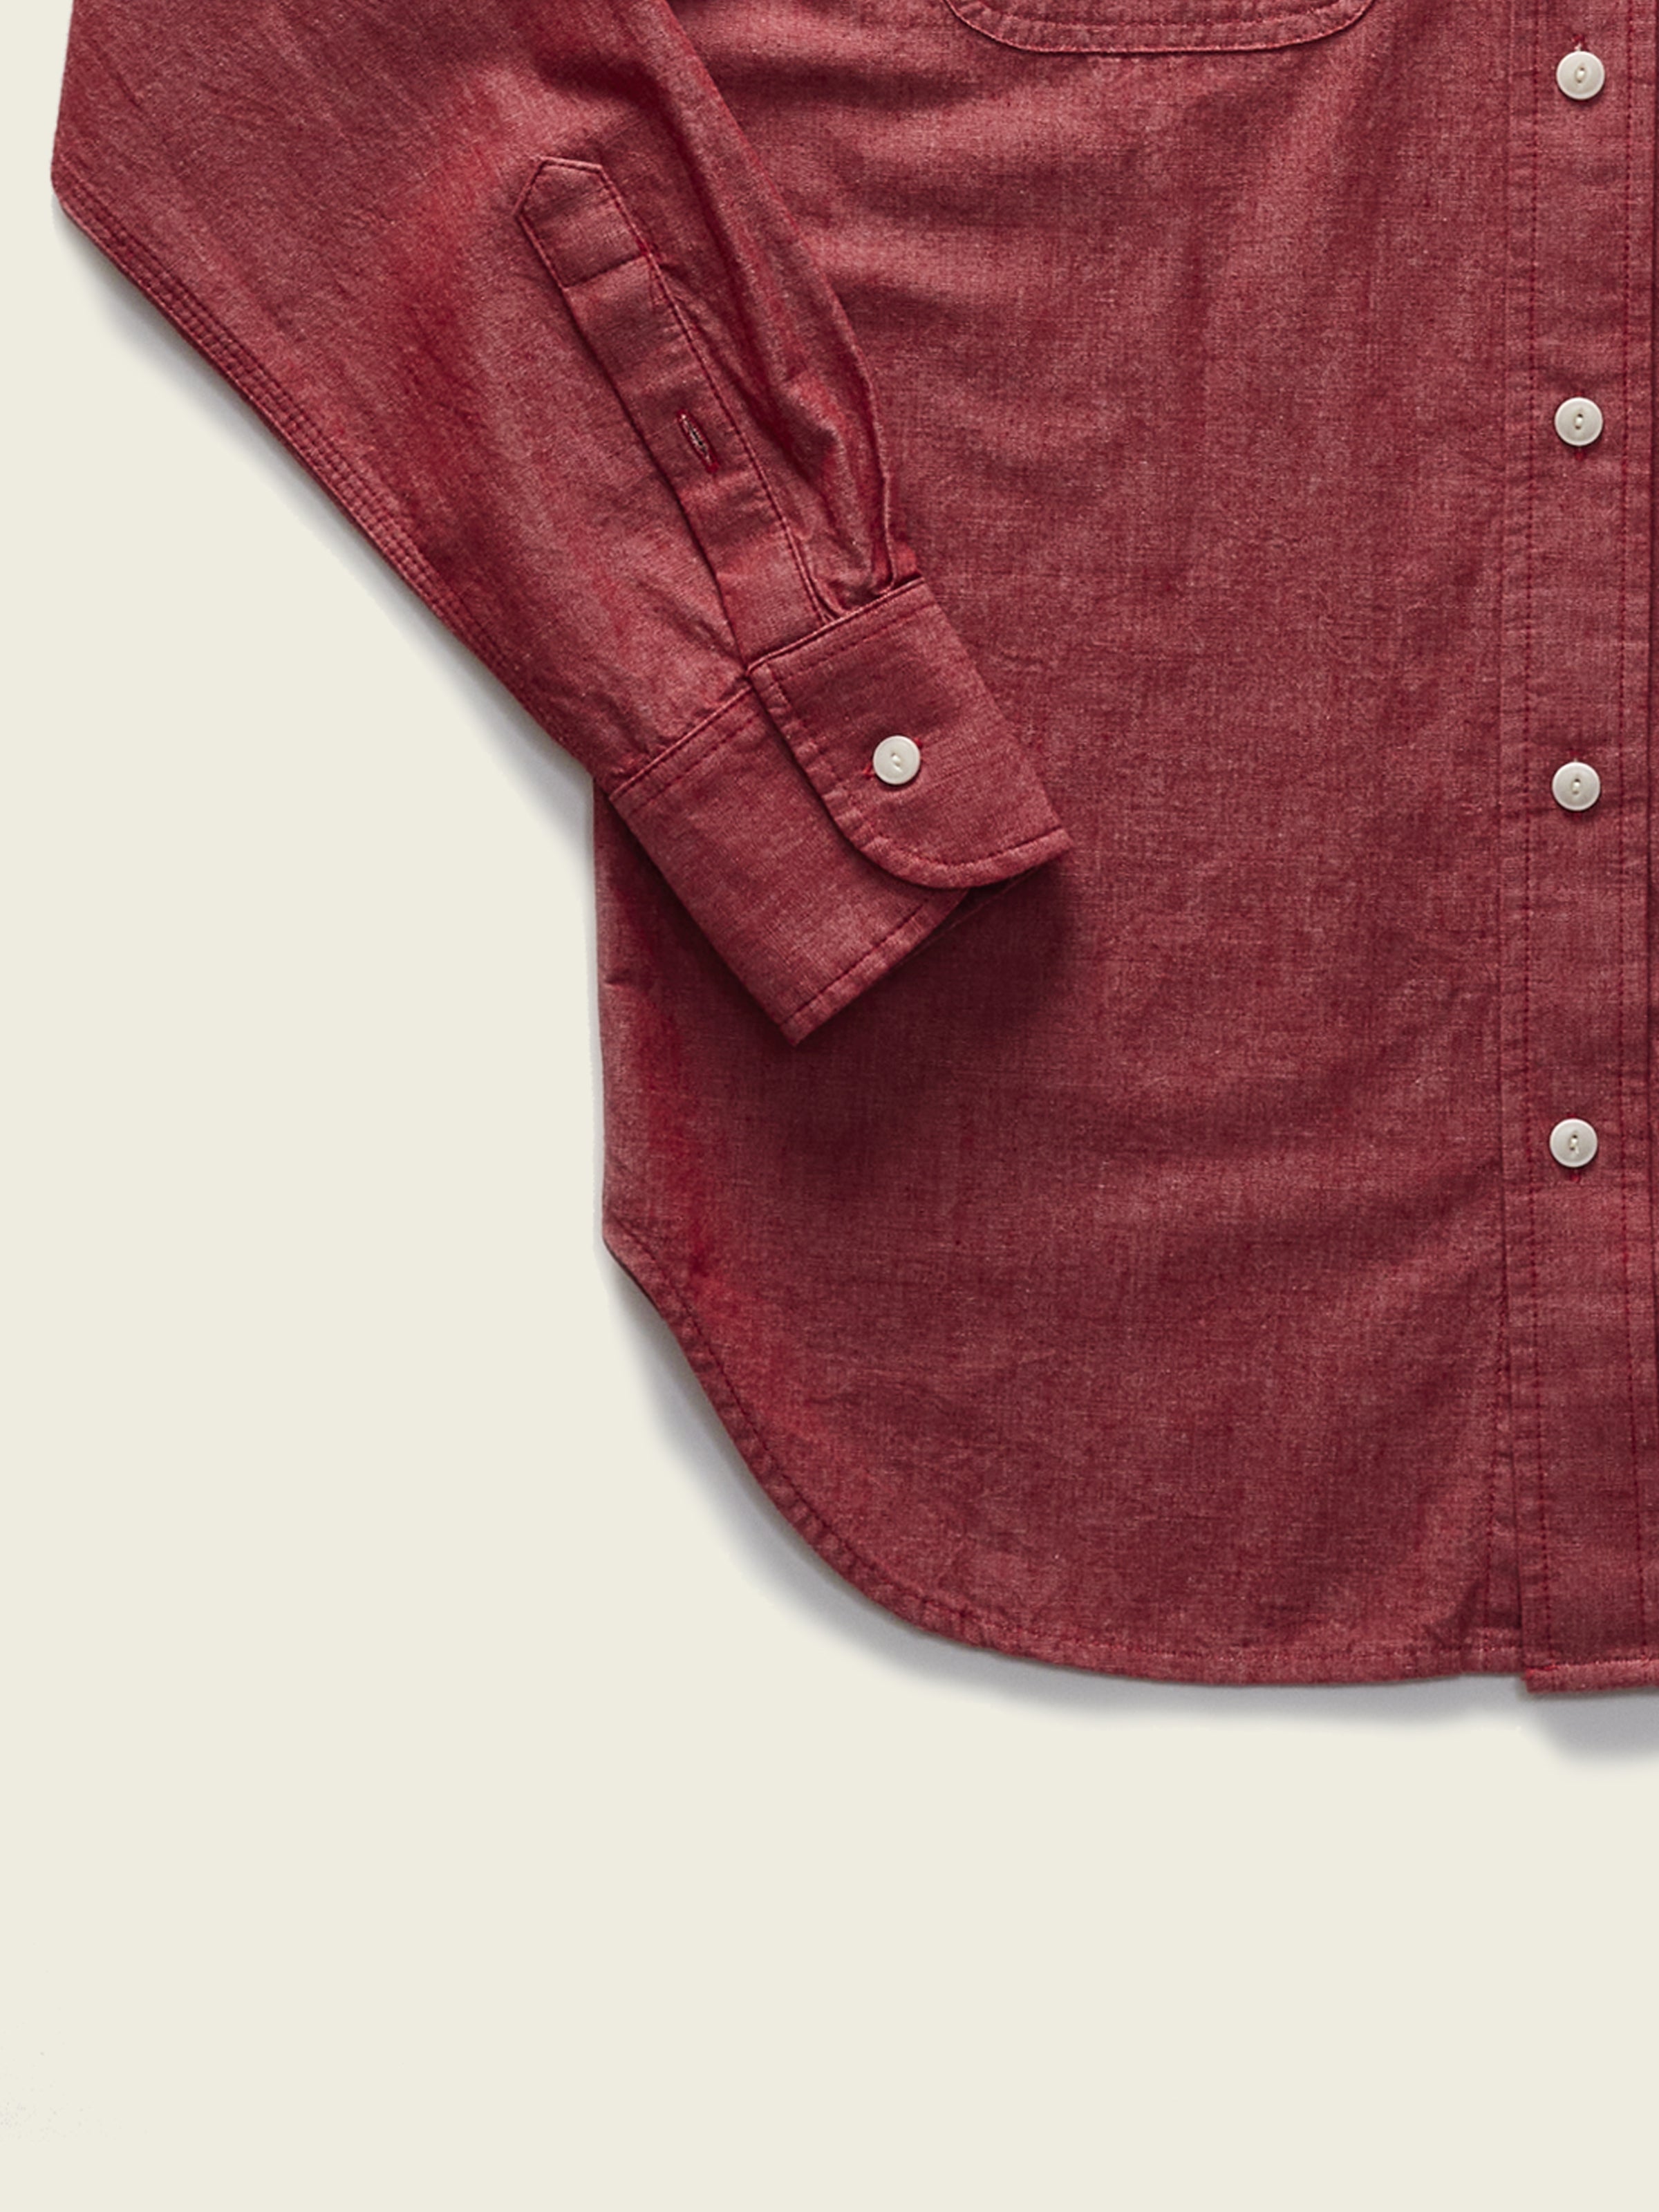 Chambray Shirt in Red